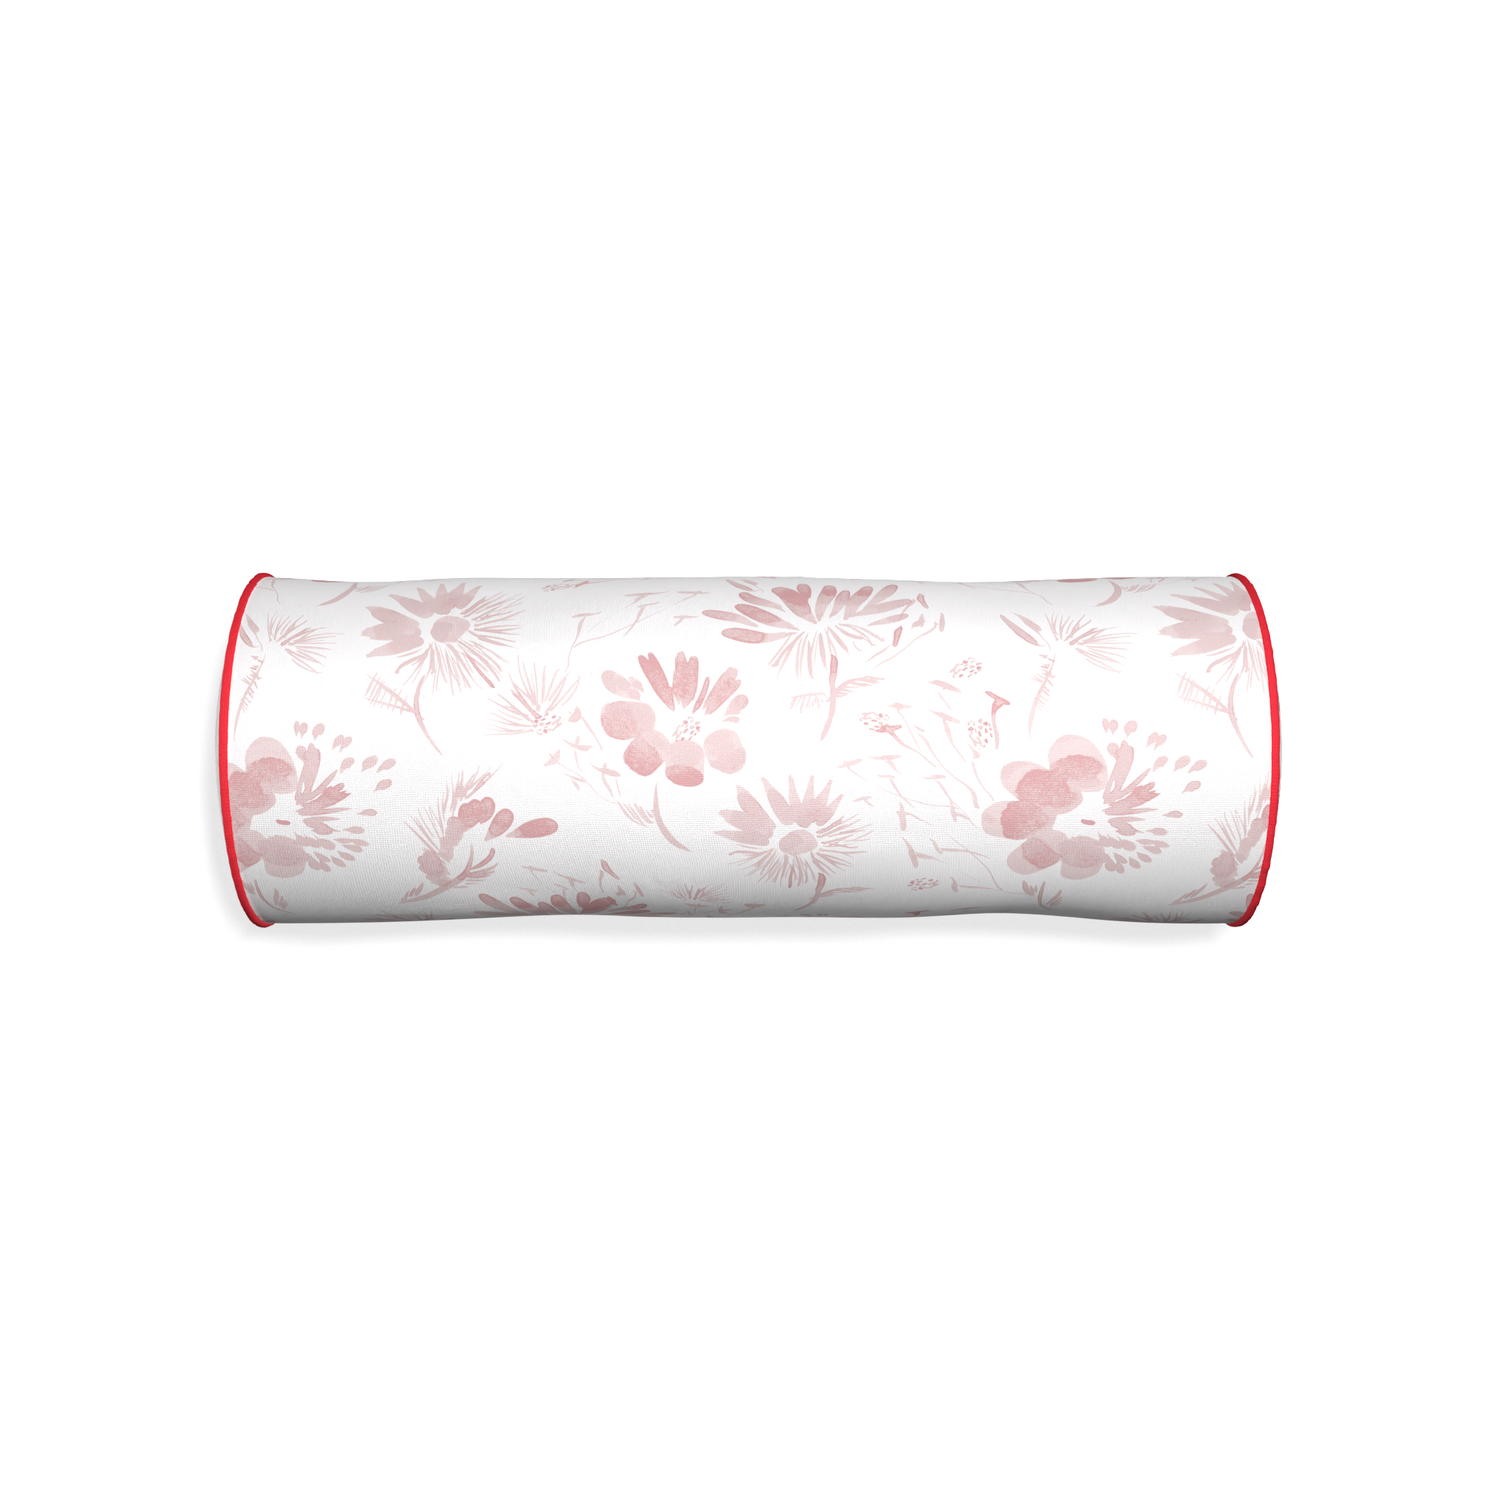 Bolster blake custom pillow with cherry piping on white background